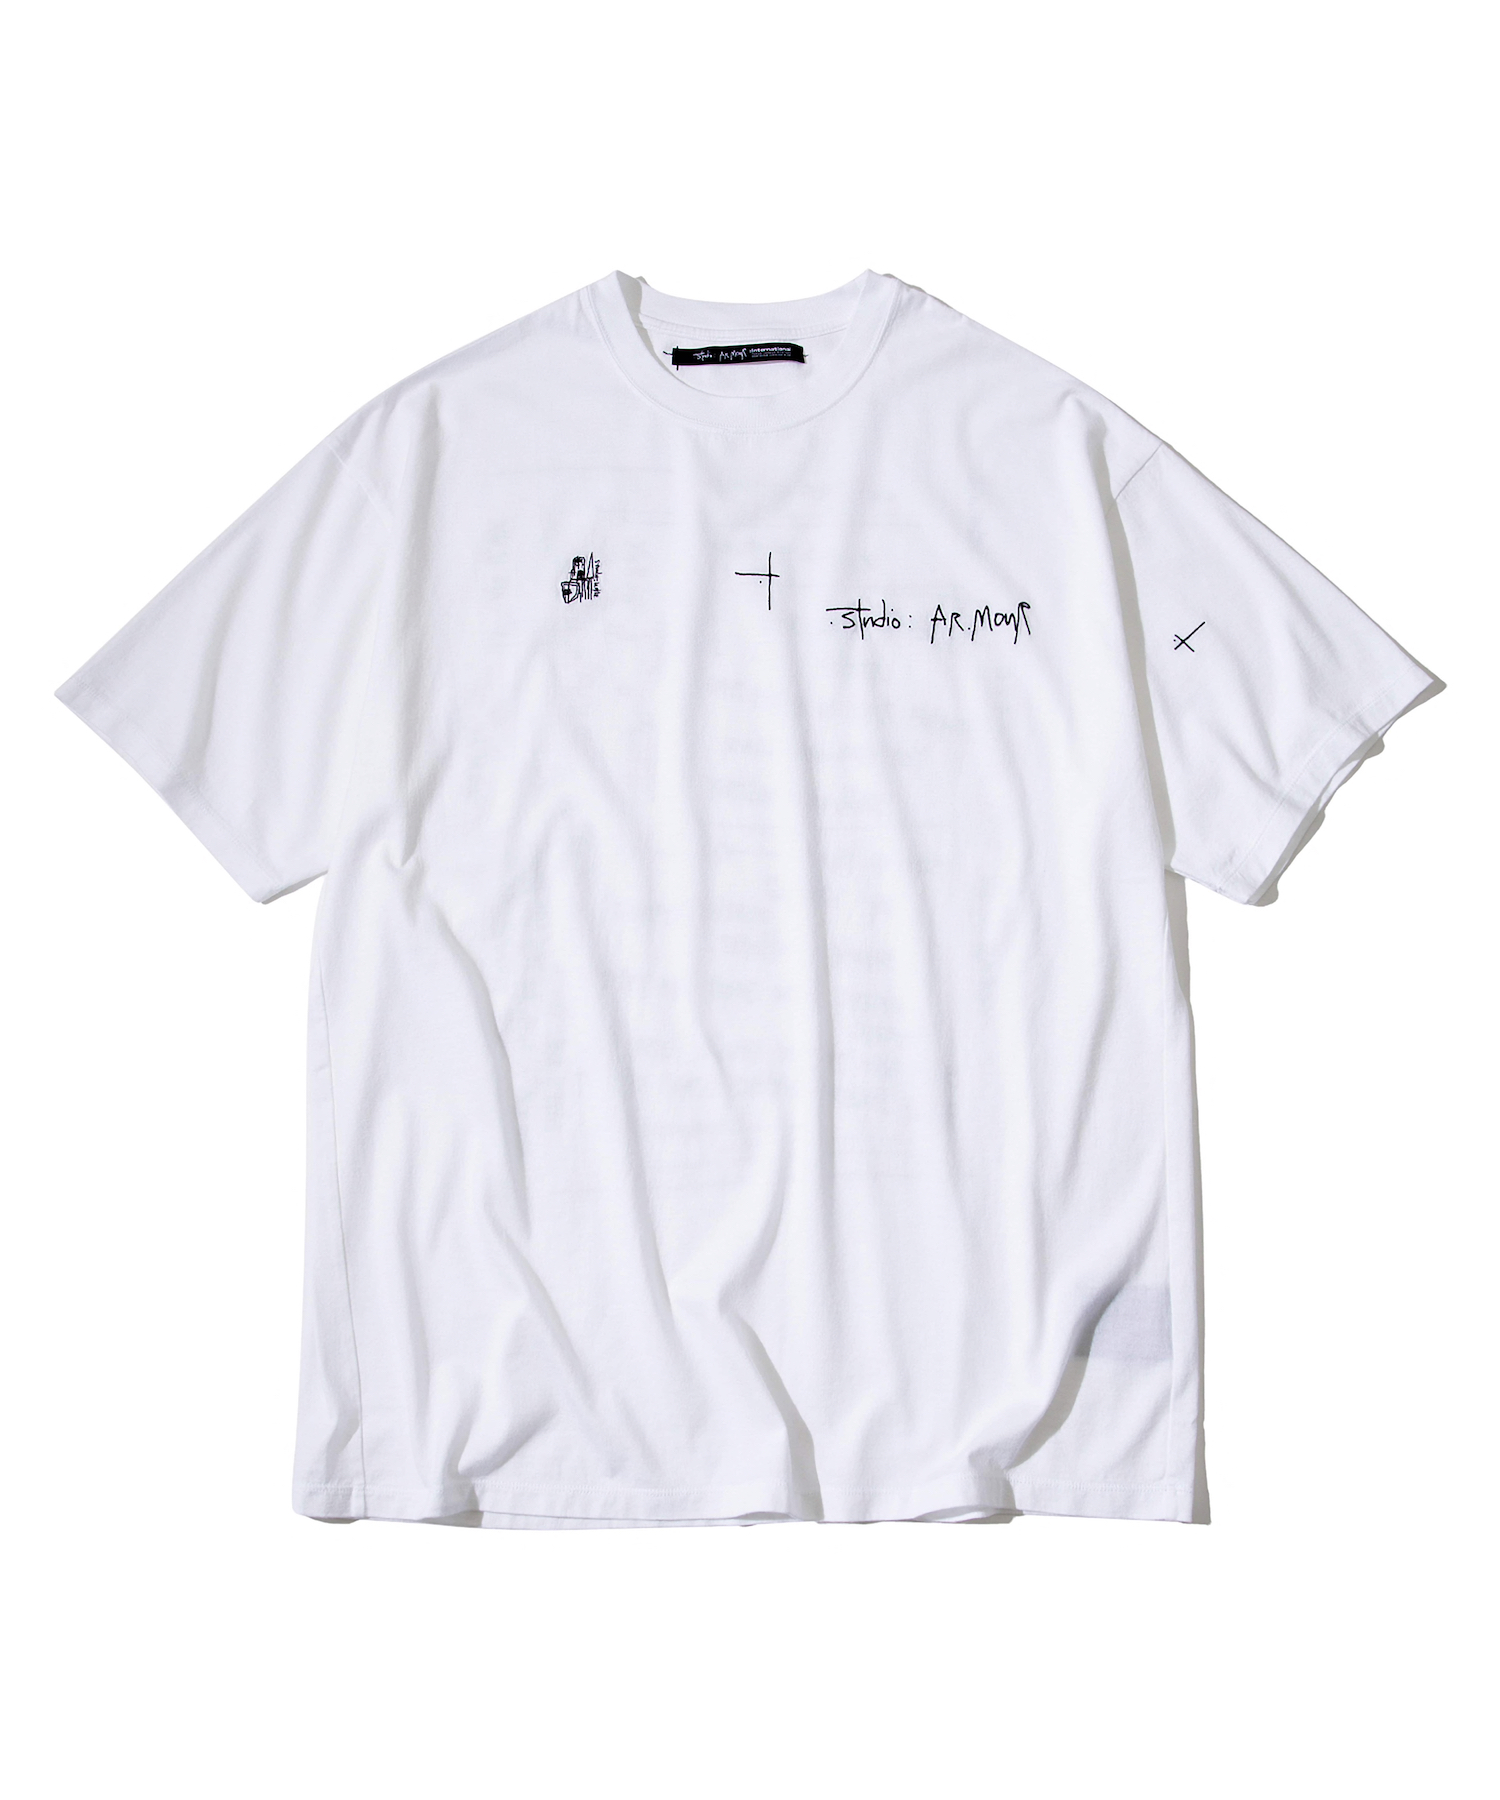 File:2021 studio ARMouR × UNKLE TEE 2 white front.jpg